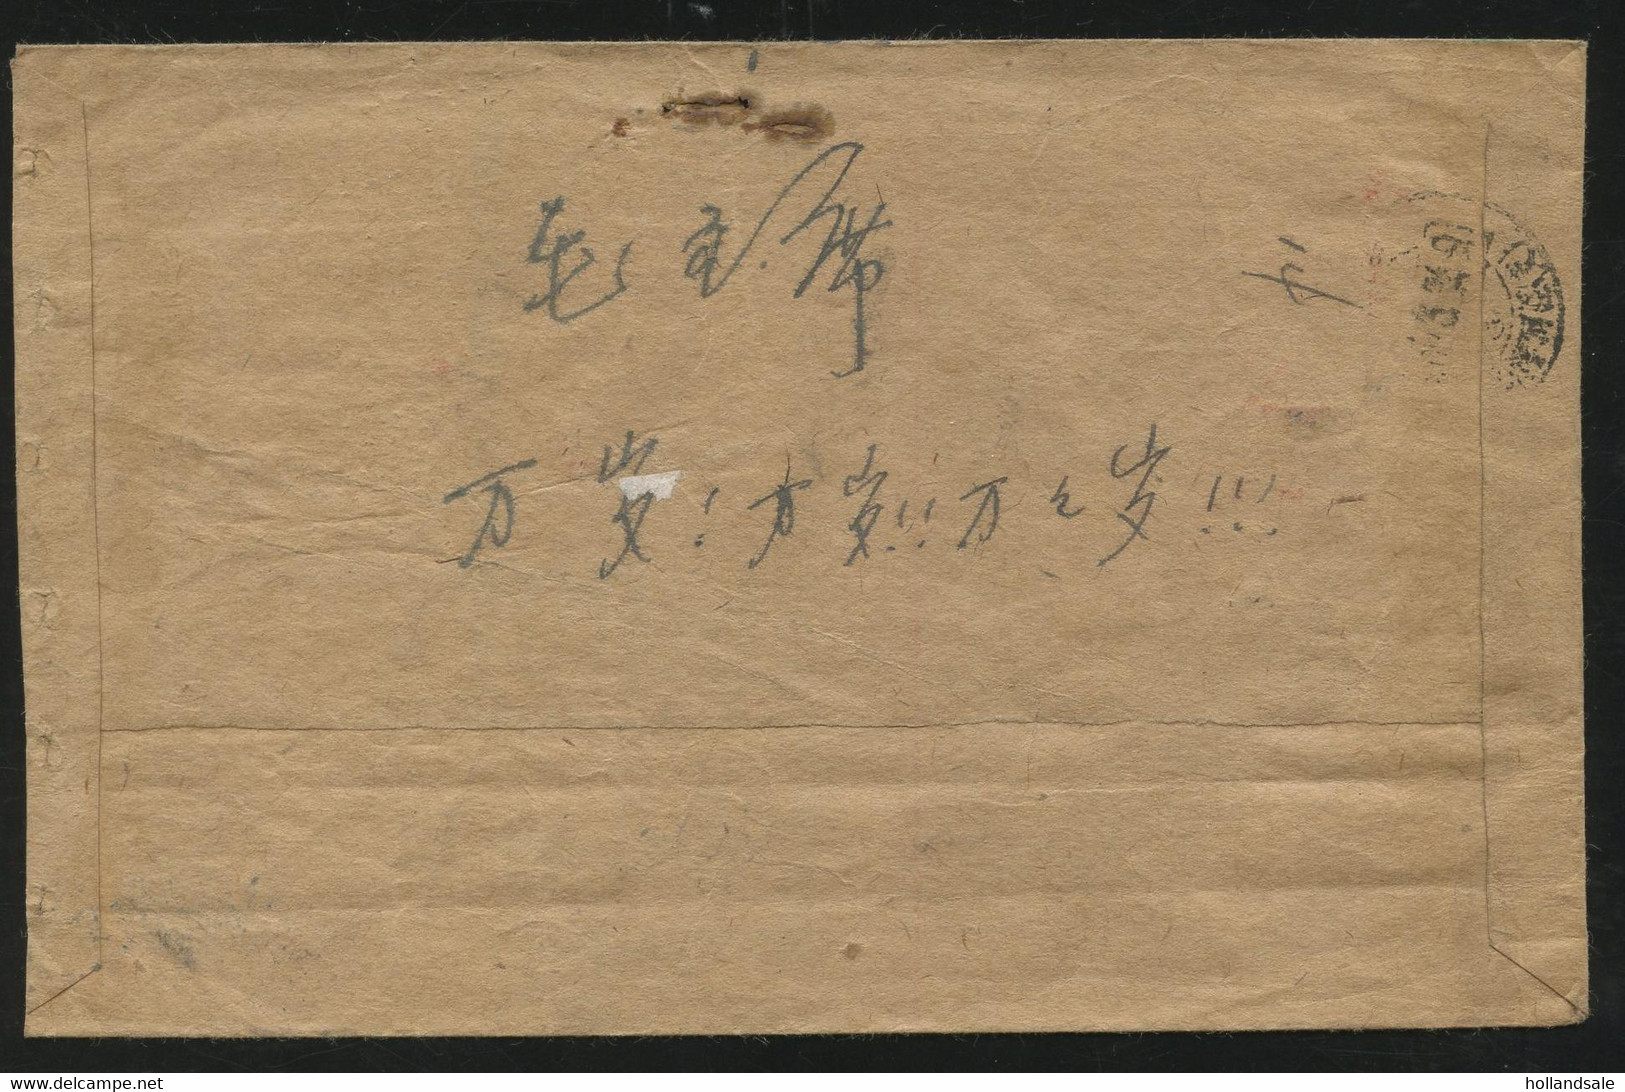 CHINA PRC - 1969 Cover With Stamp W15. Staple Hole At Top. - Covers & Documents